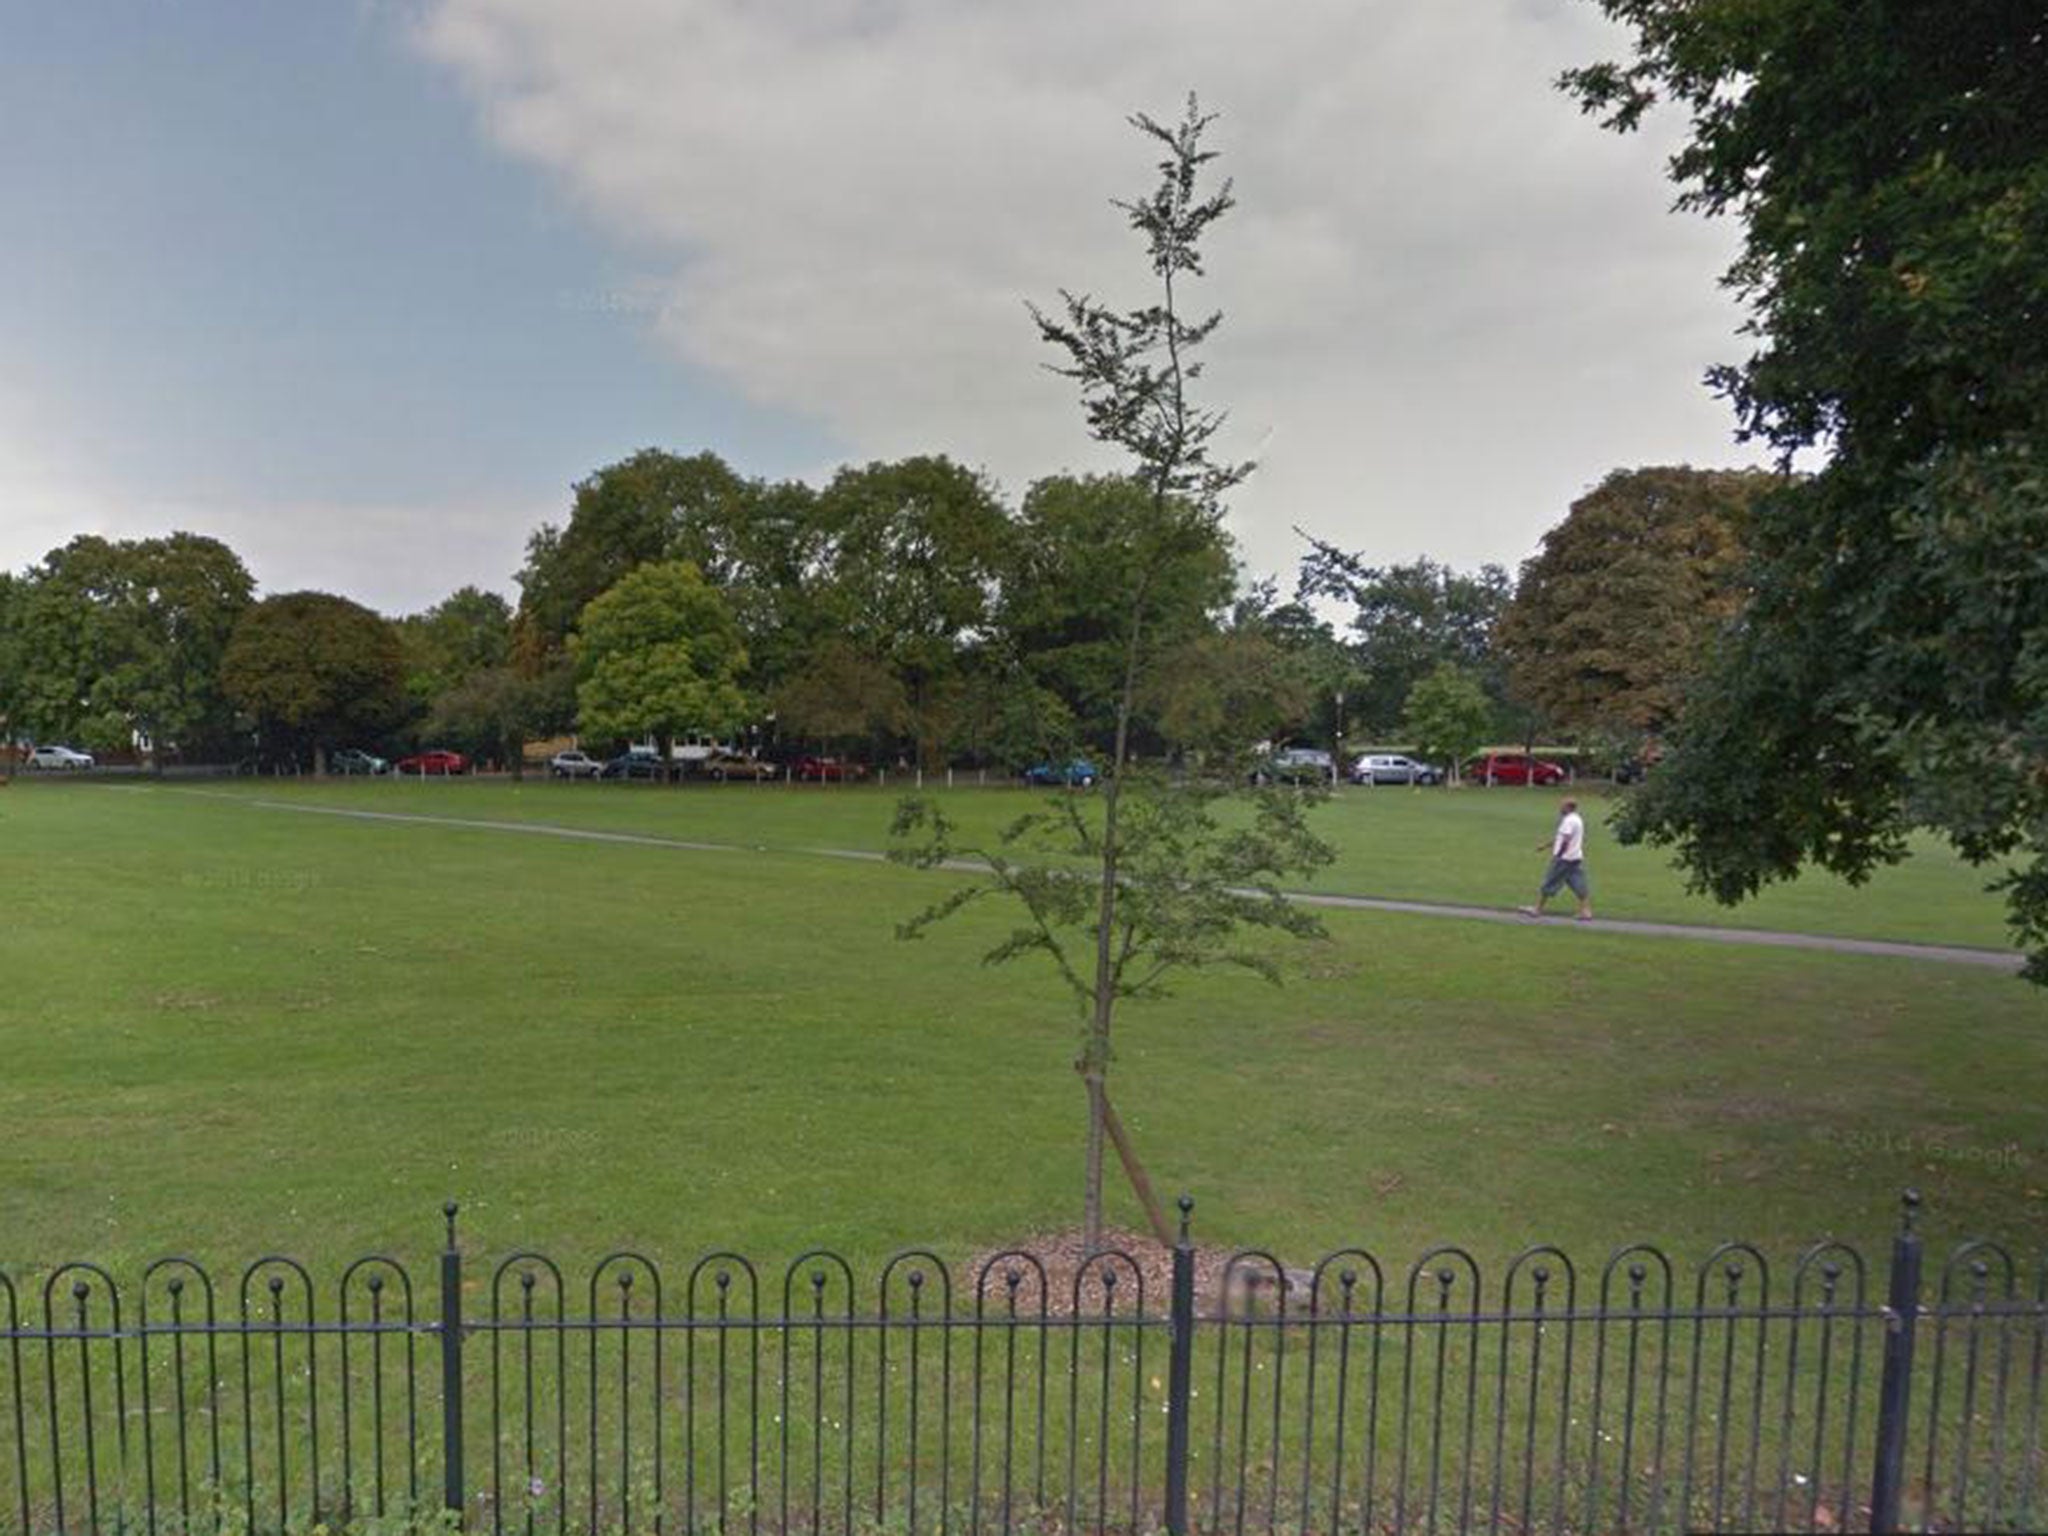 The man had been walking his dog on Cricket Green, in Mitcham